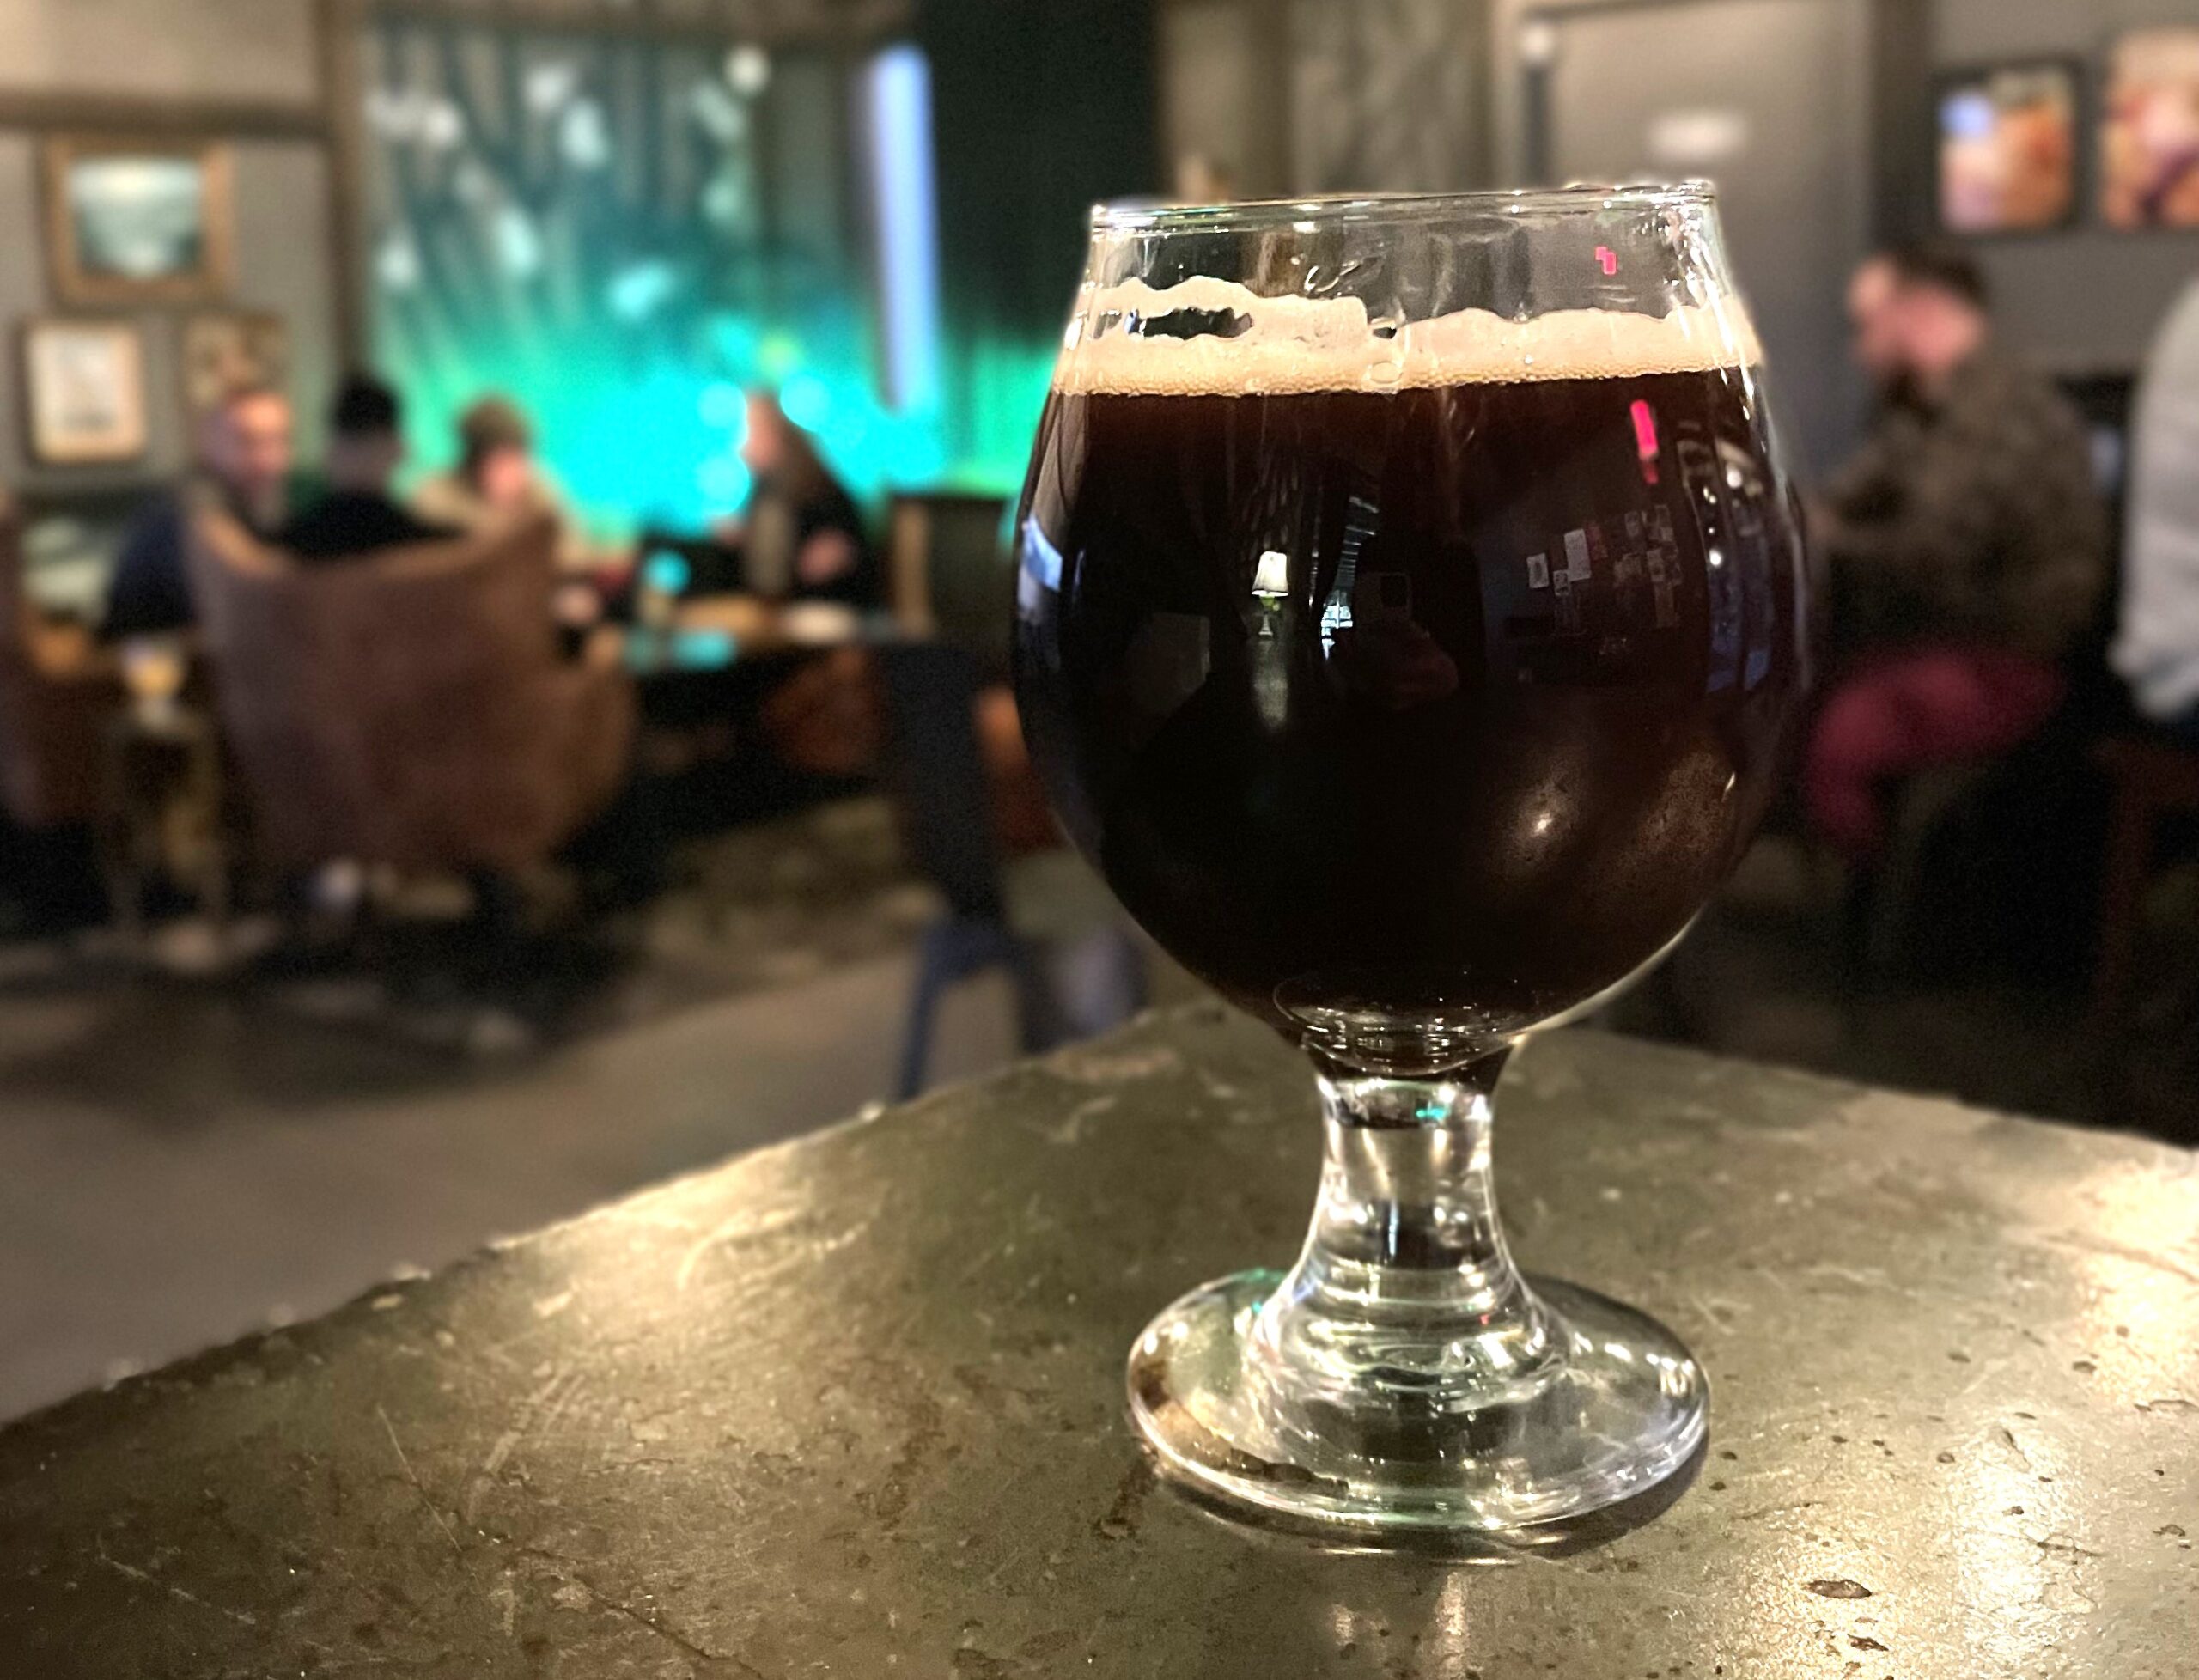 Muddy Udders Pastry Stout by Harbottle Brewing Company (Photo by Jessie Mance)